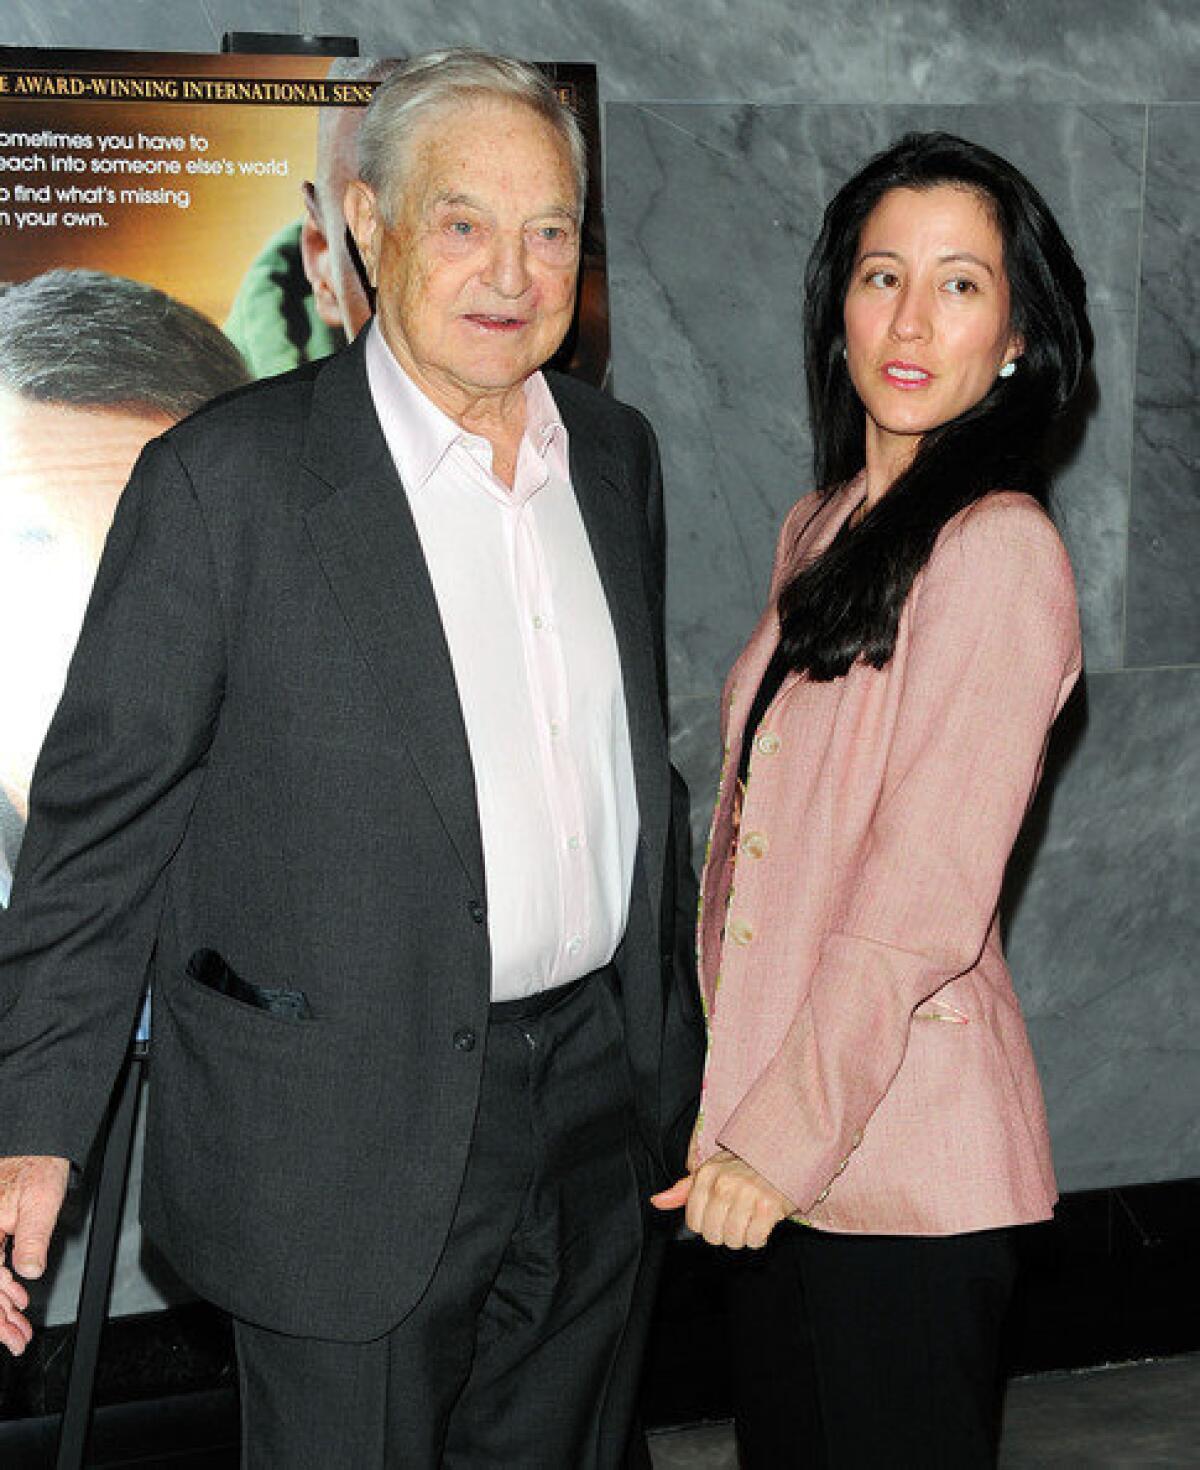 George Soros and Tamiko Bolton, who recently became engaged